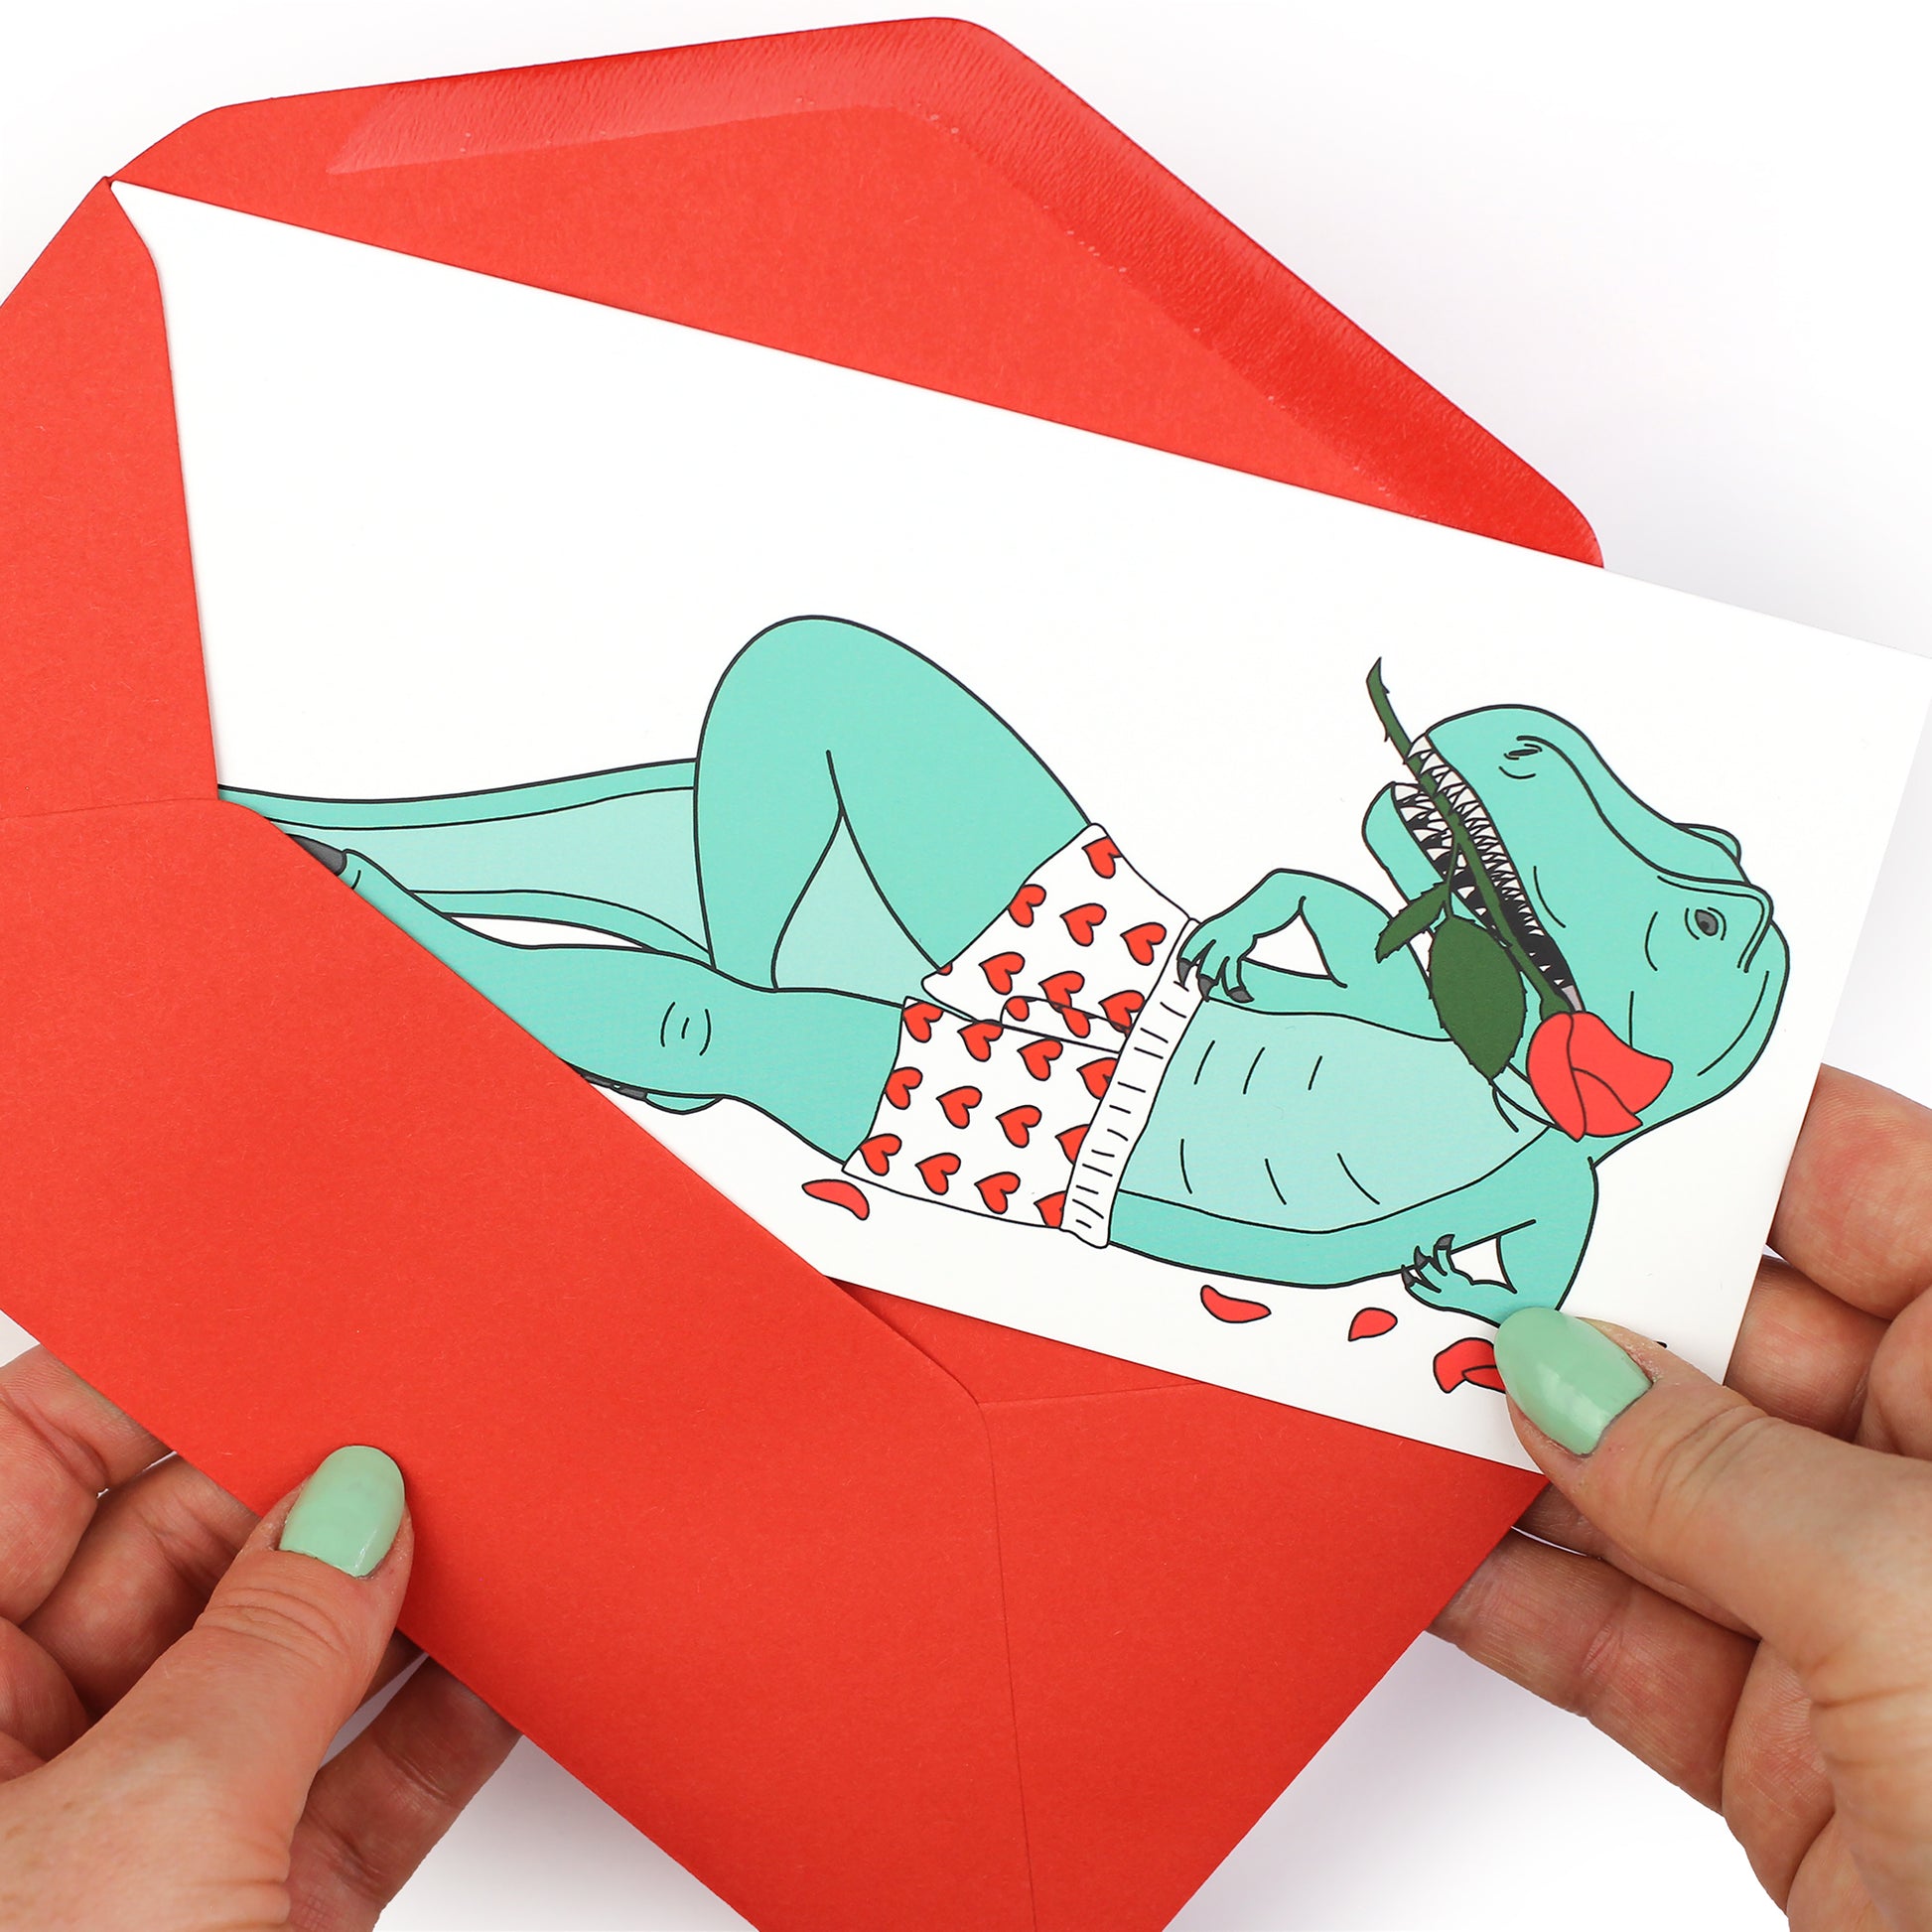 hands holding an envelope while removing the sexy t-rex dinosaur card from the envelope